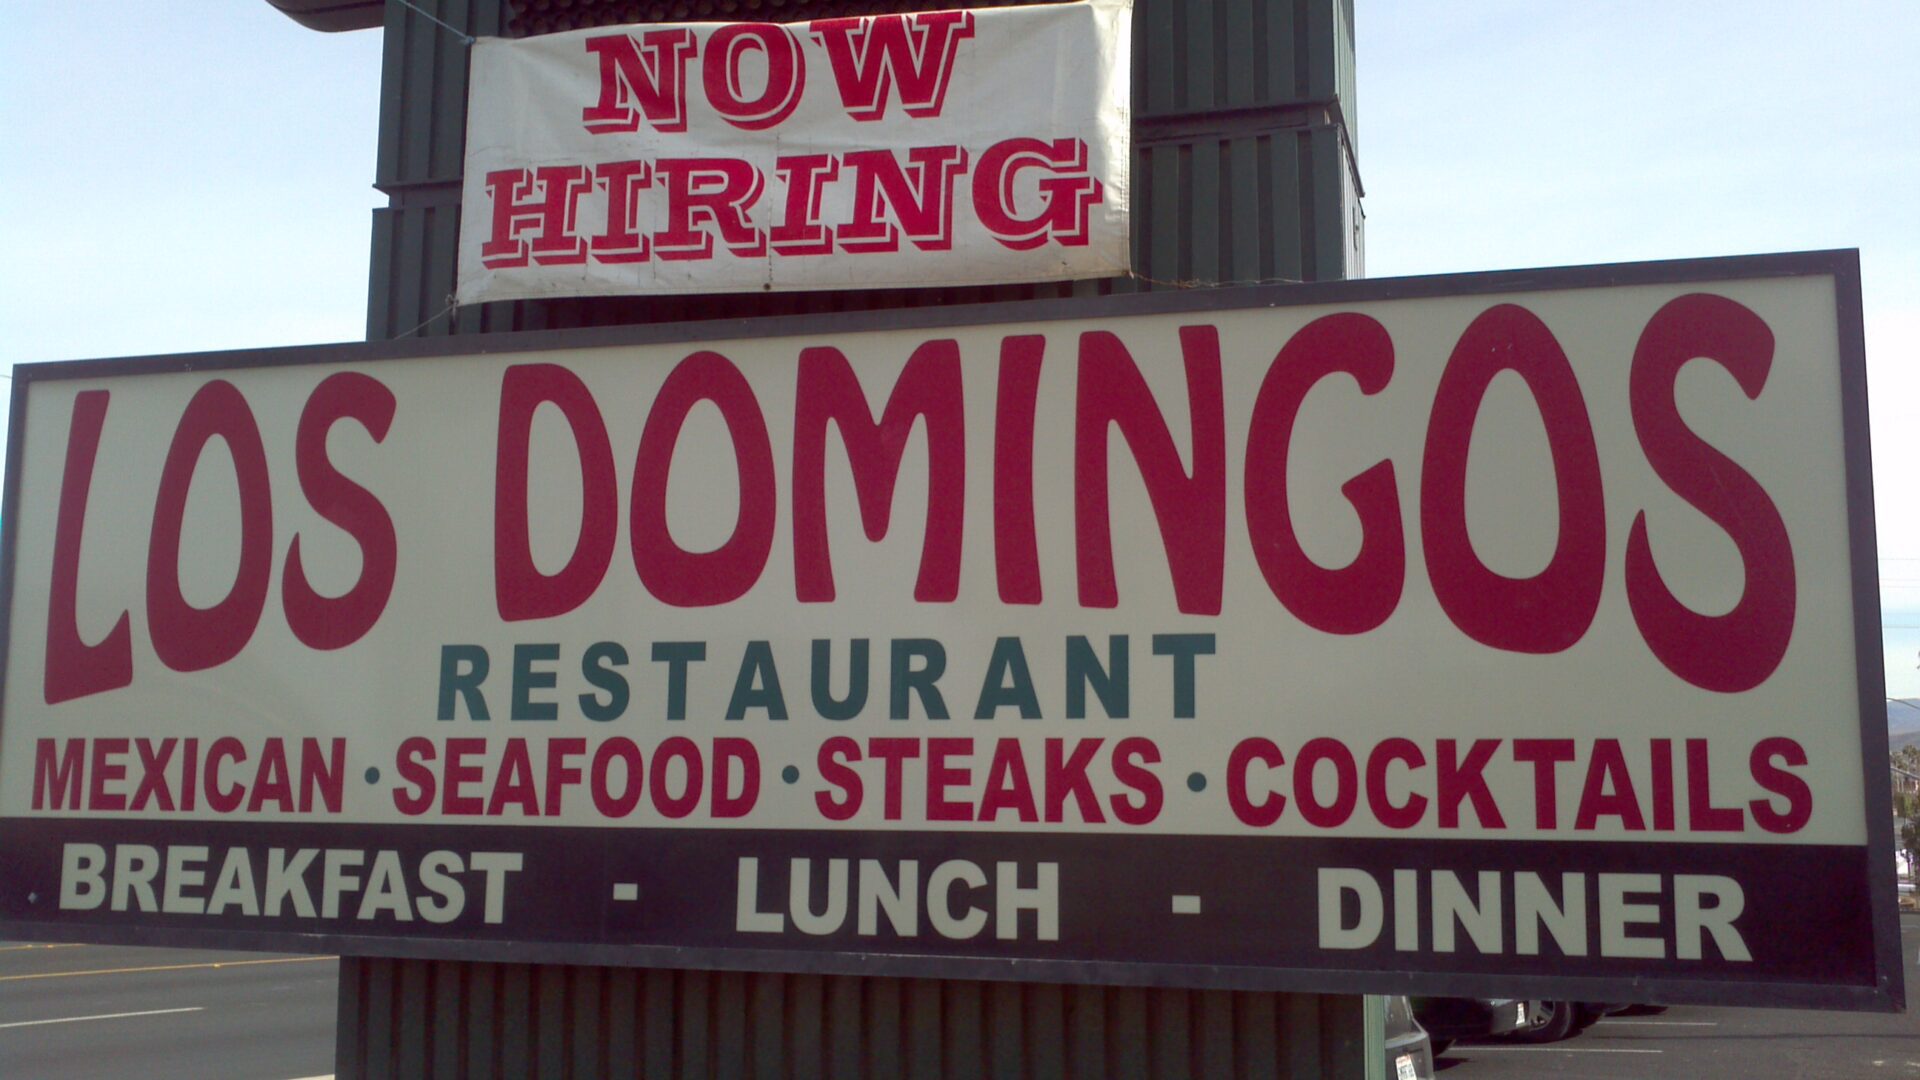 A sign for los domingos restaurant.